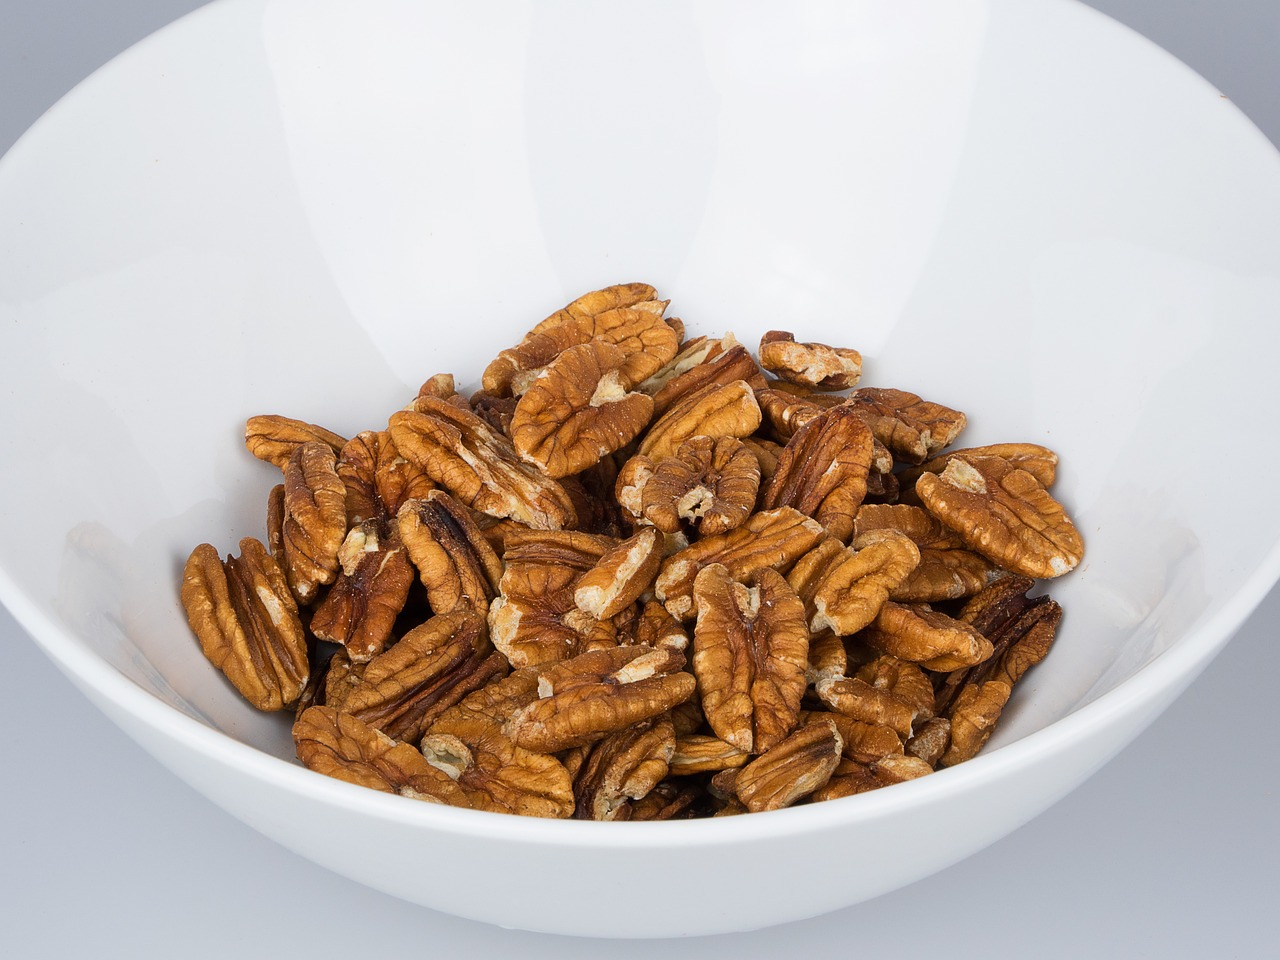 a photo of a bowl of pecans